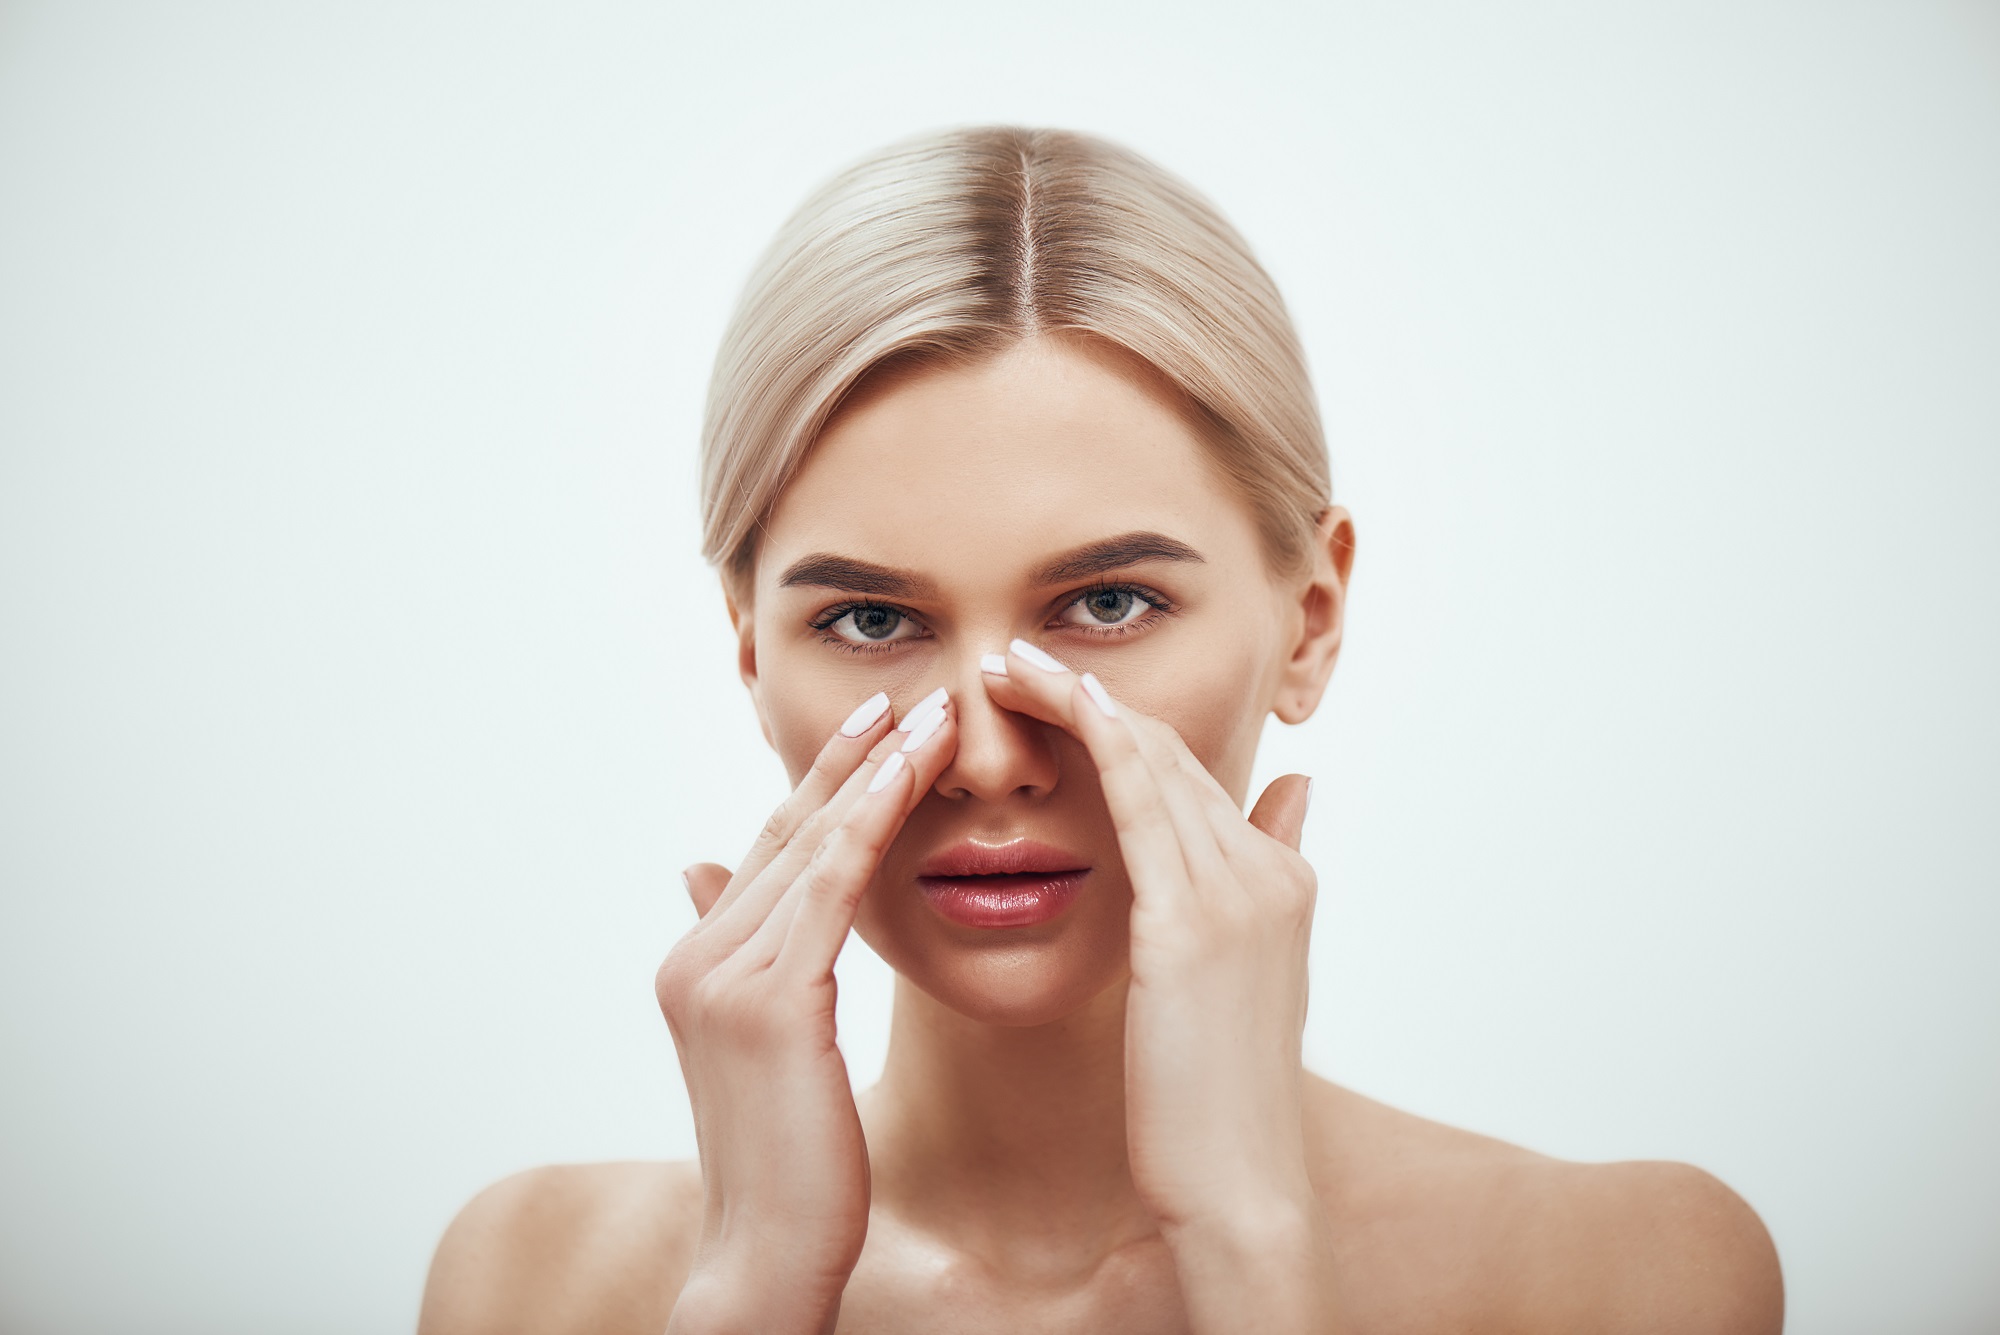 BDD sufferers compulsively check a body part, often a facial feature, ask for reassurance, conceal it, and seek out multiple cosmetic plastic surgeries.